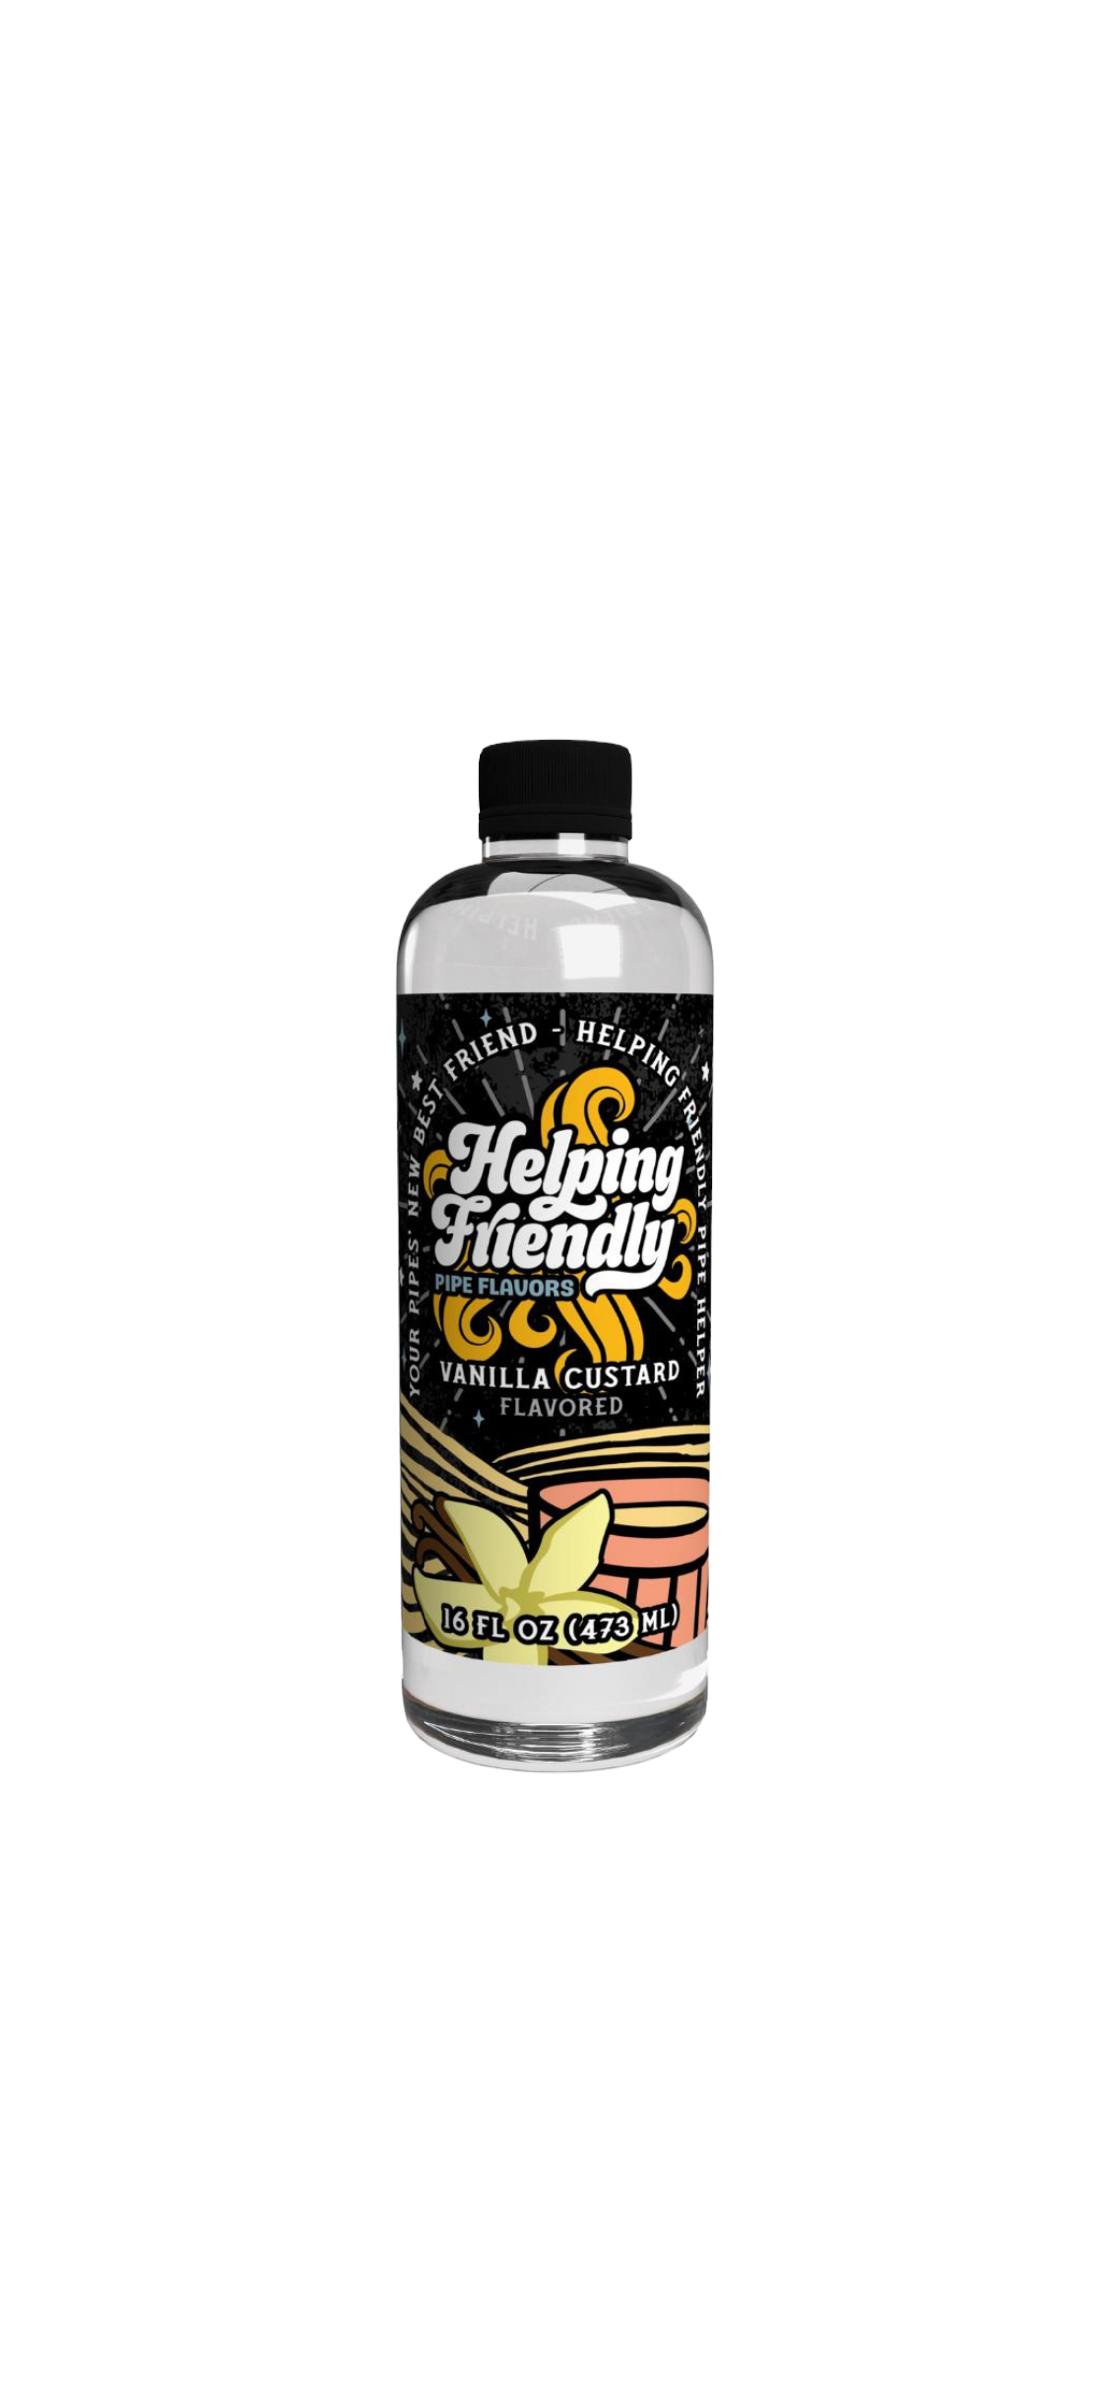 HELPING FRIENDLY | FLAVORED WATER FOR WATERPIPES | 16 FL OZ